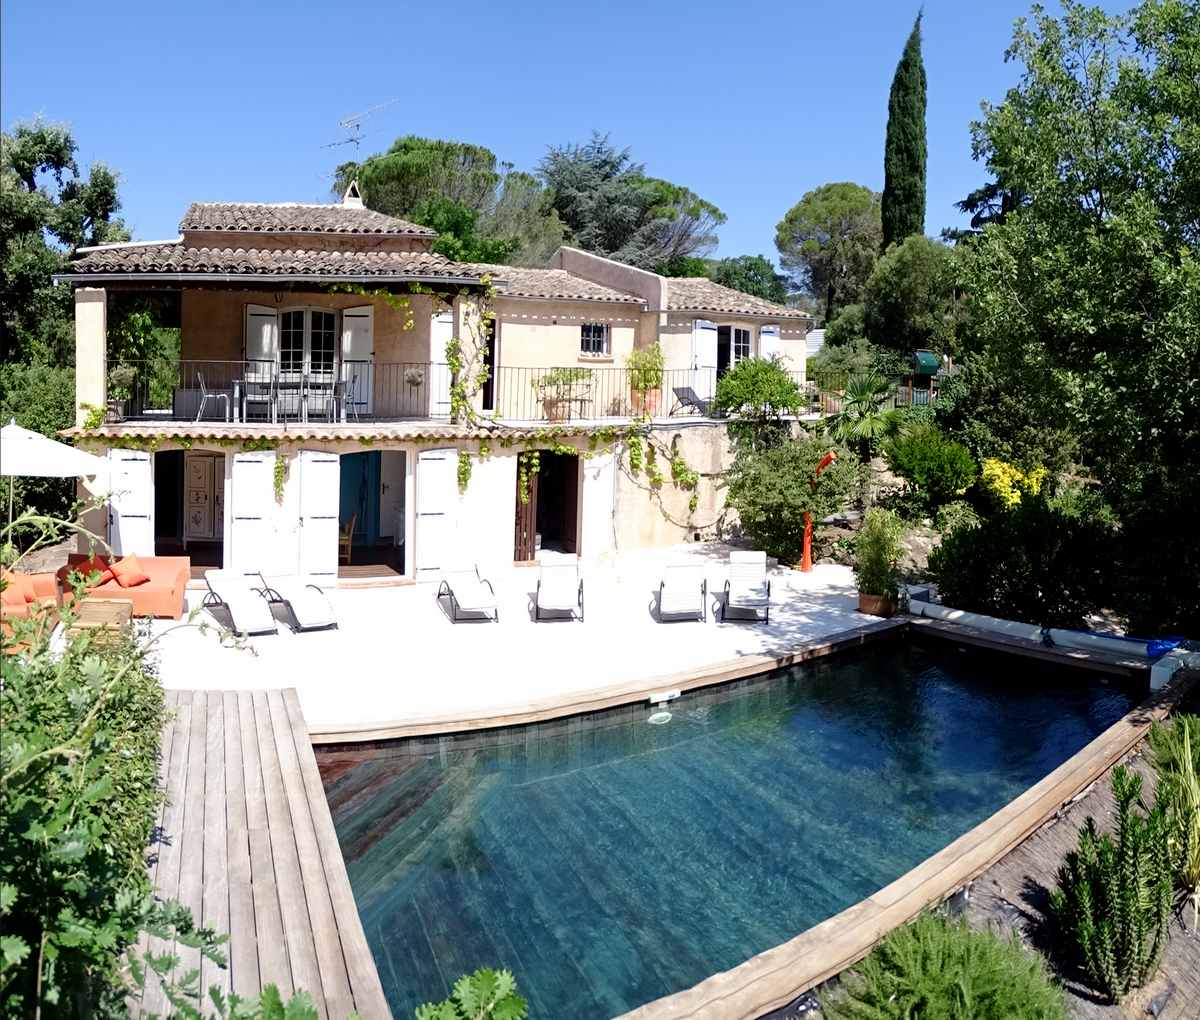 Holiday villa rental in Saint-Raphael France villa with large pool near beaches and golf. 